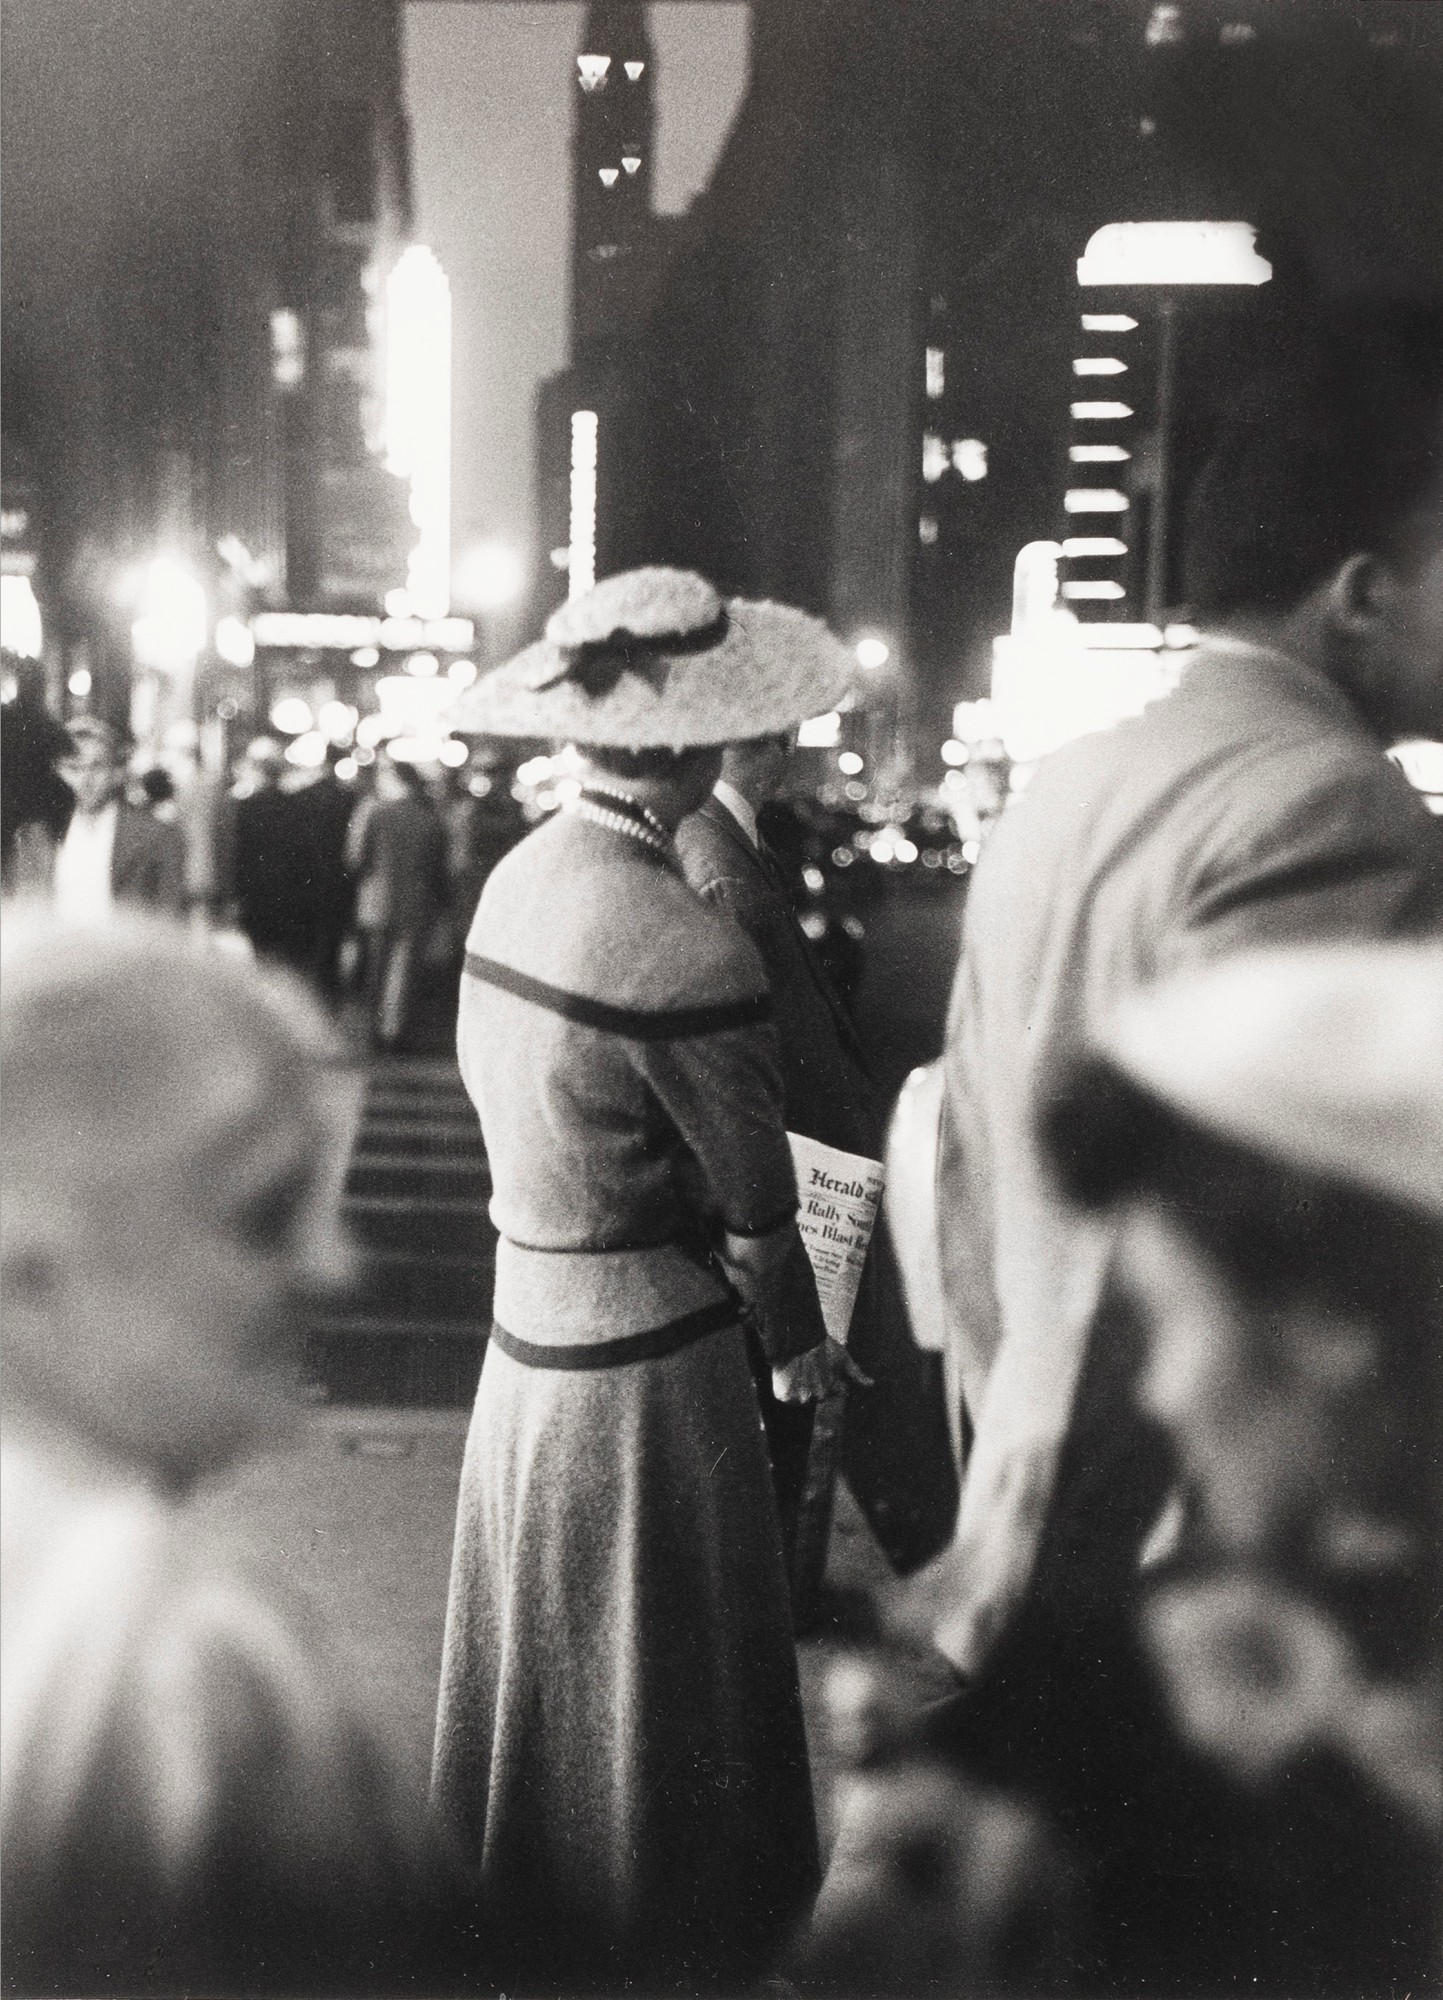 Looking torward Time Square, NYC by Louis Faurer, 1947-1950